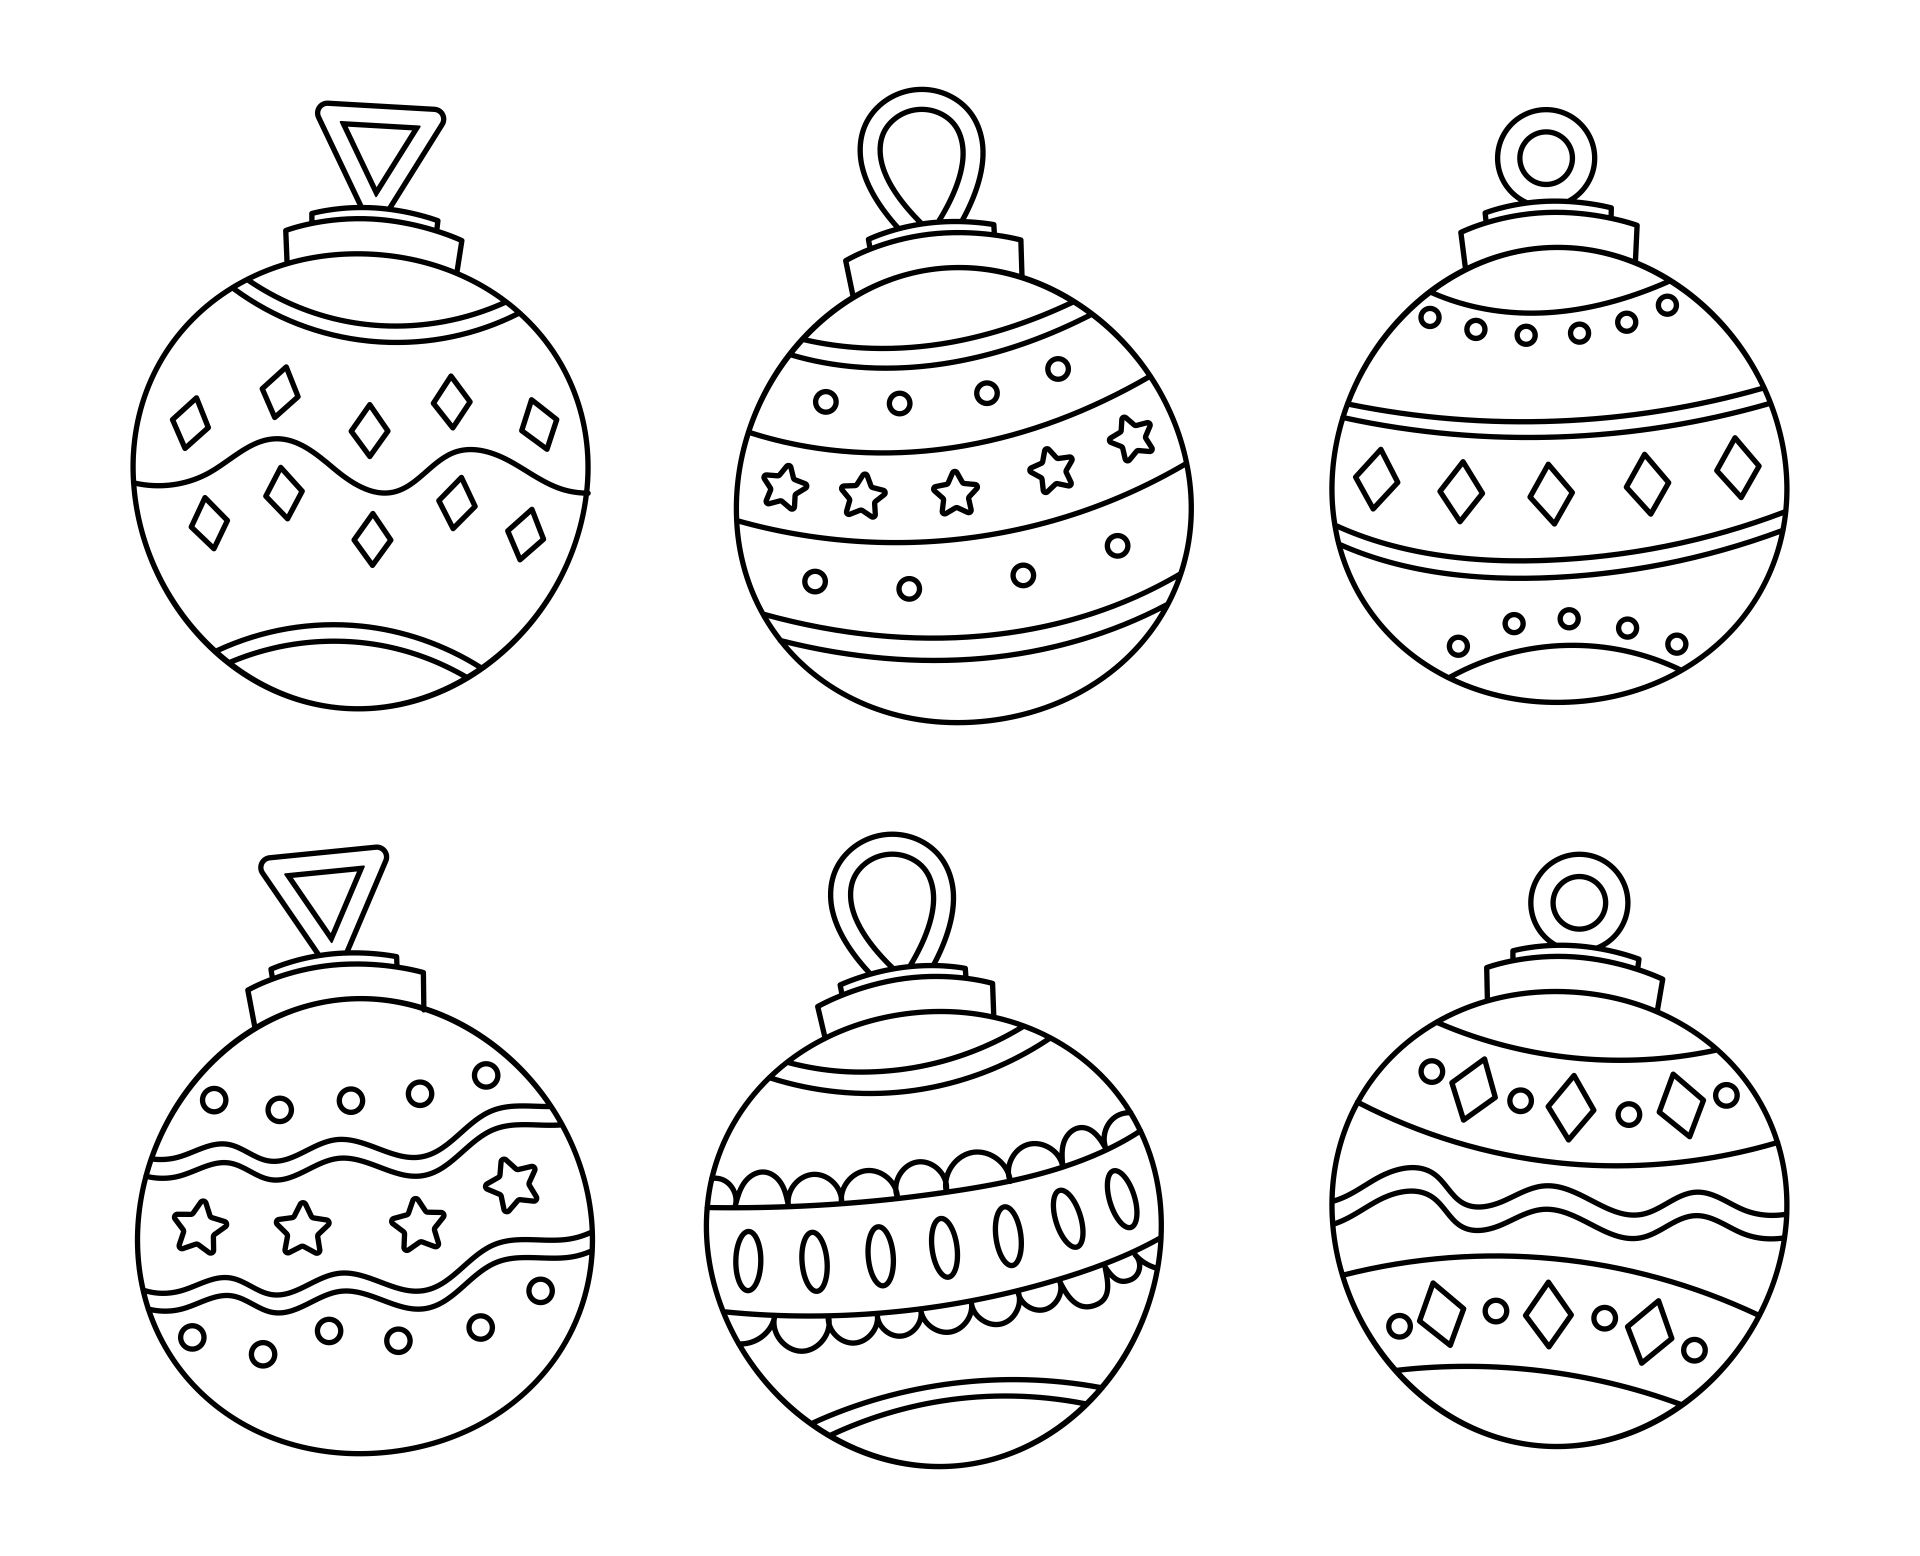 Printable Patterned Christmas Ornament Coloring Page